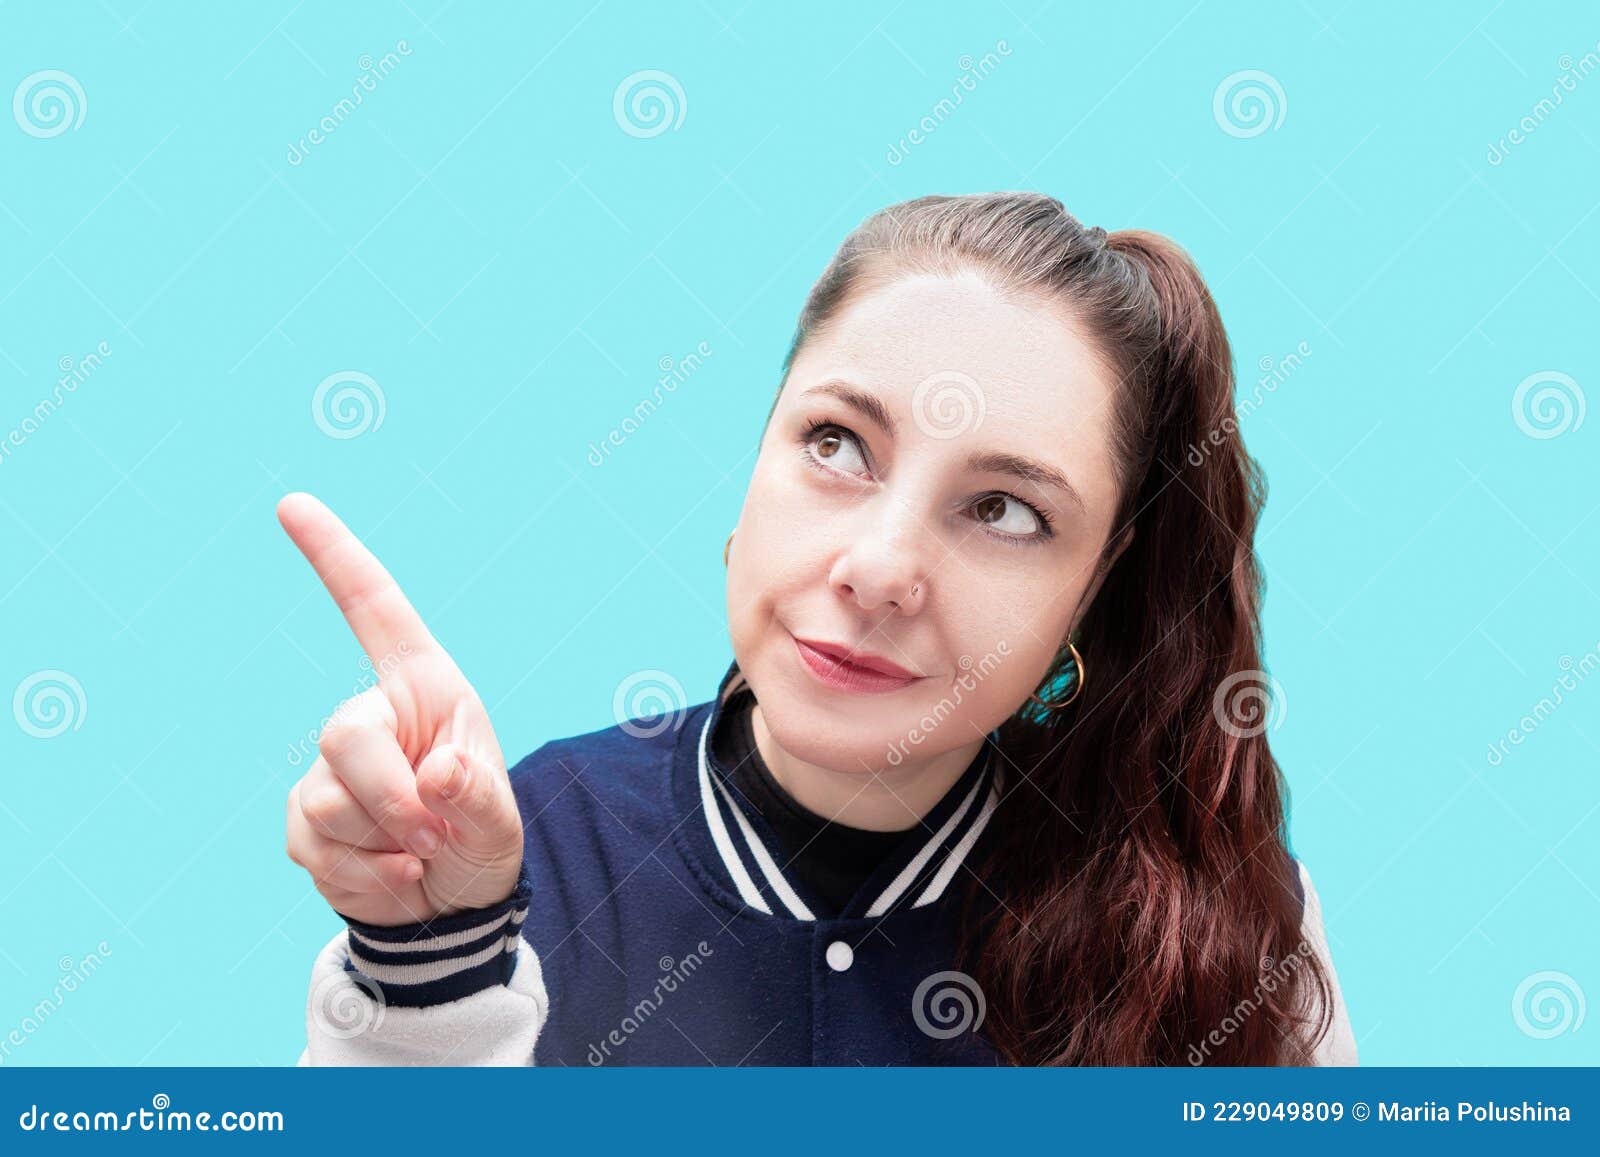 Girl In College Jacket With Ponytail Pointing With Index Finger To The ...